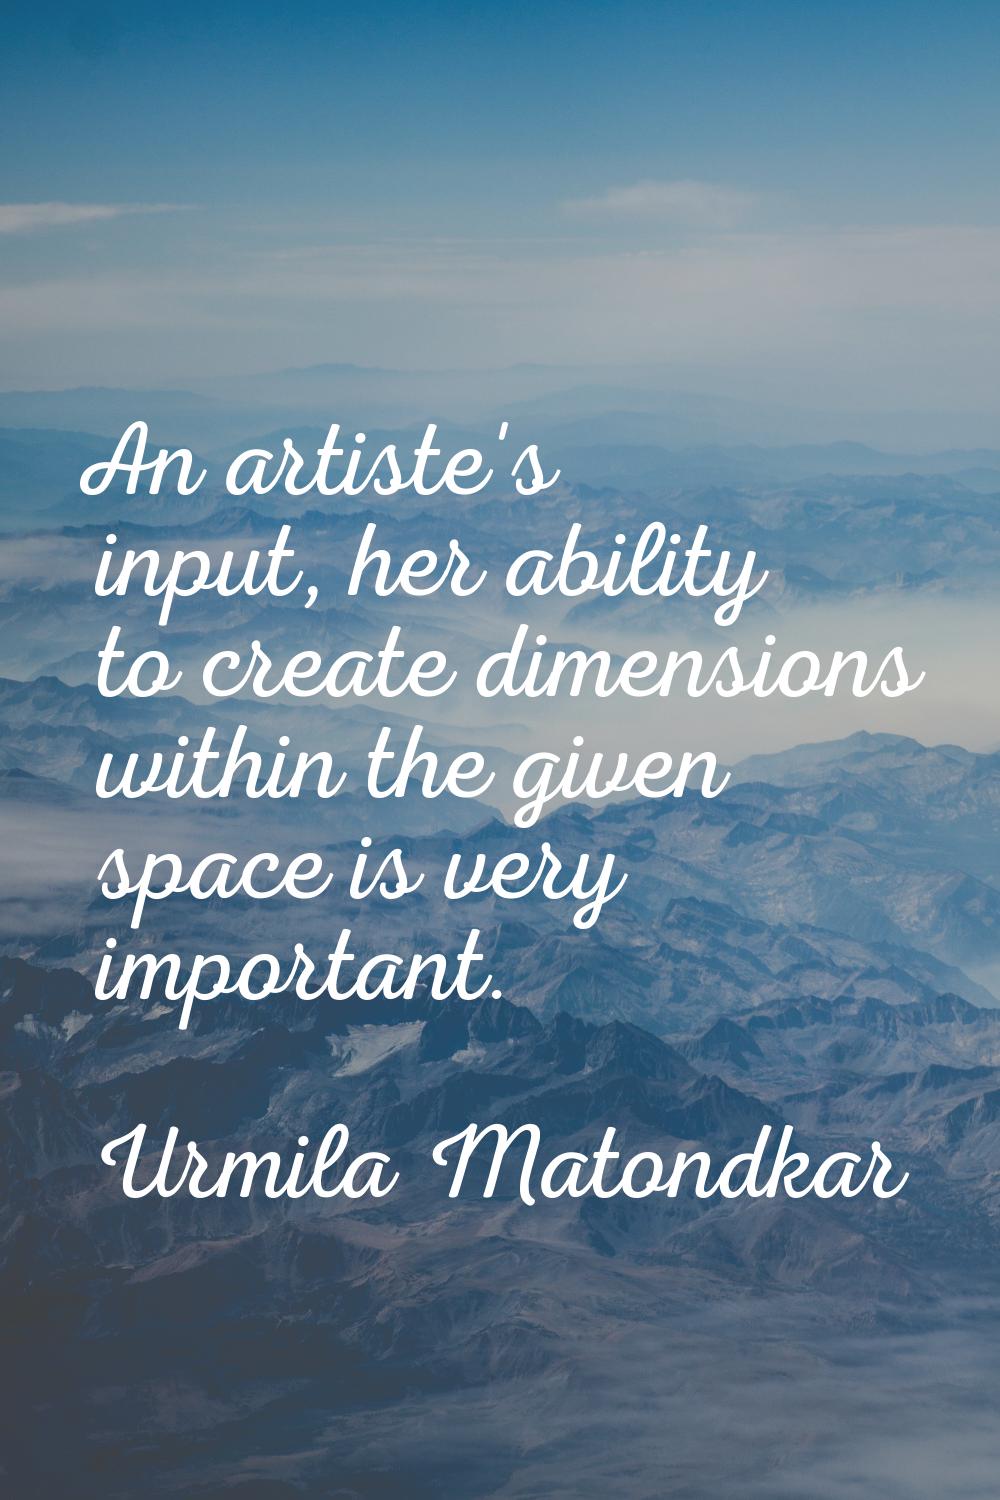 An artiste's input, her ability to create dimensions within the given space is very important.